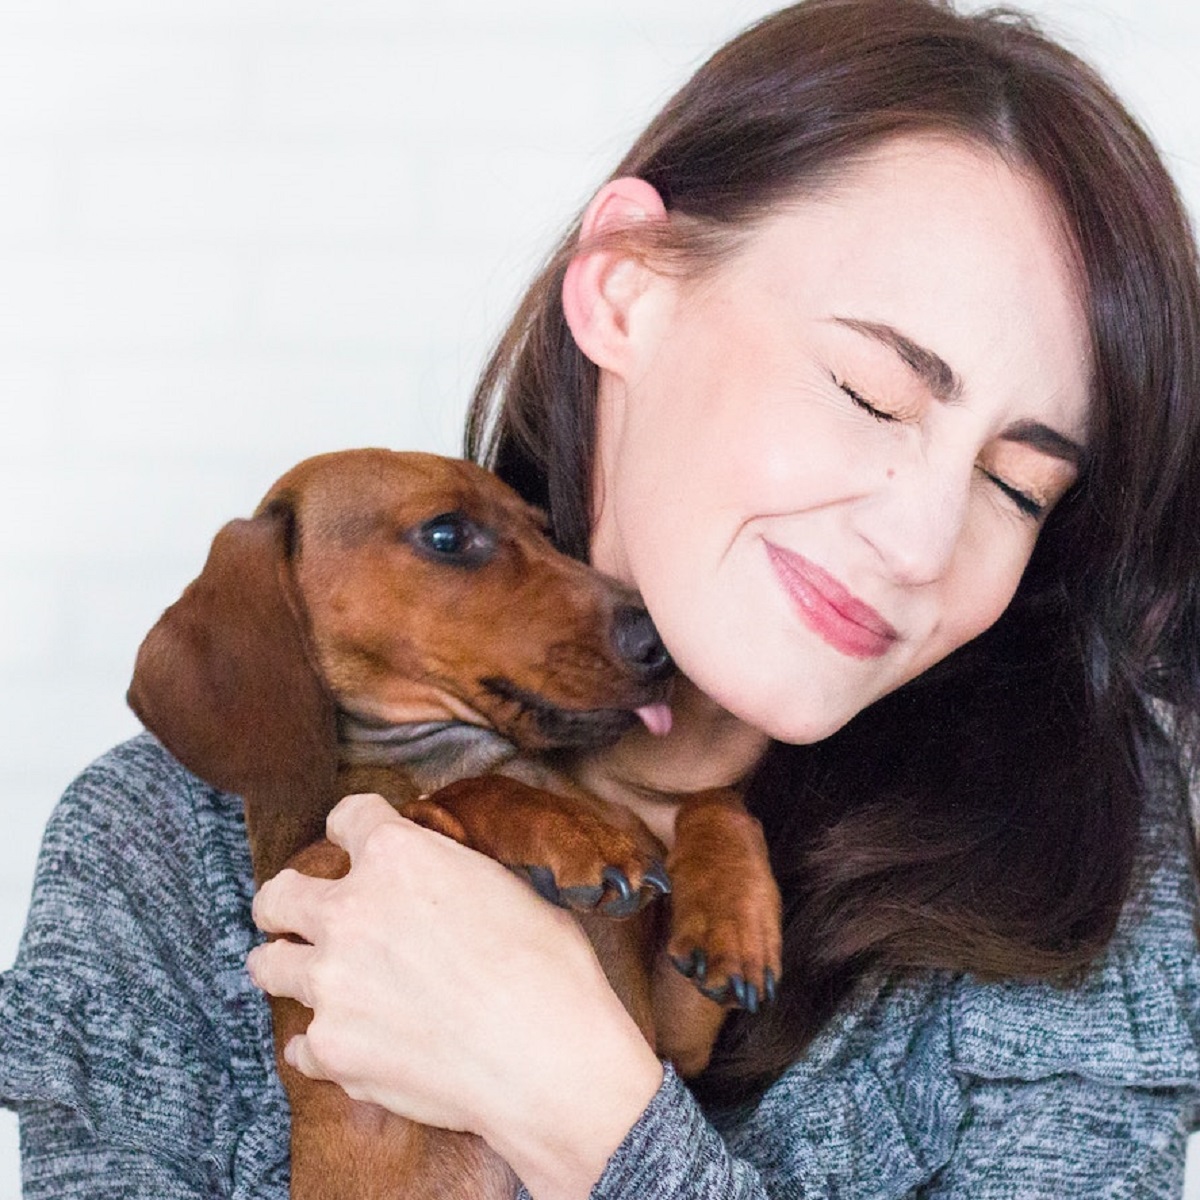 woman-holding-dachshund-dog-up-to-her-chin